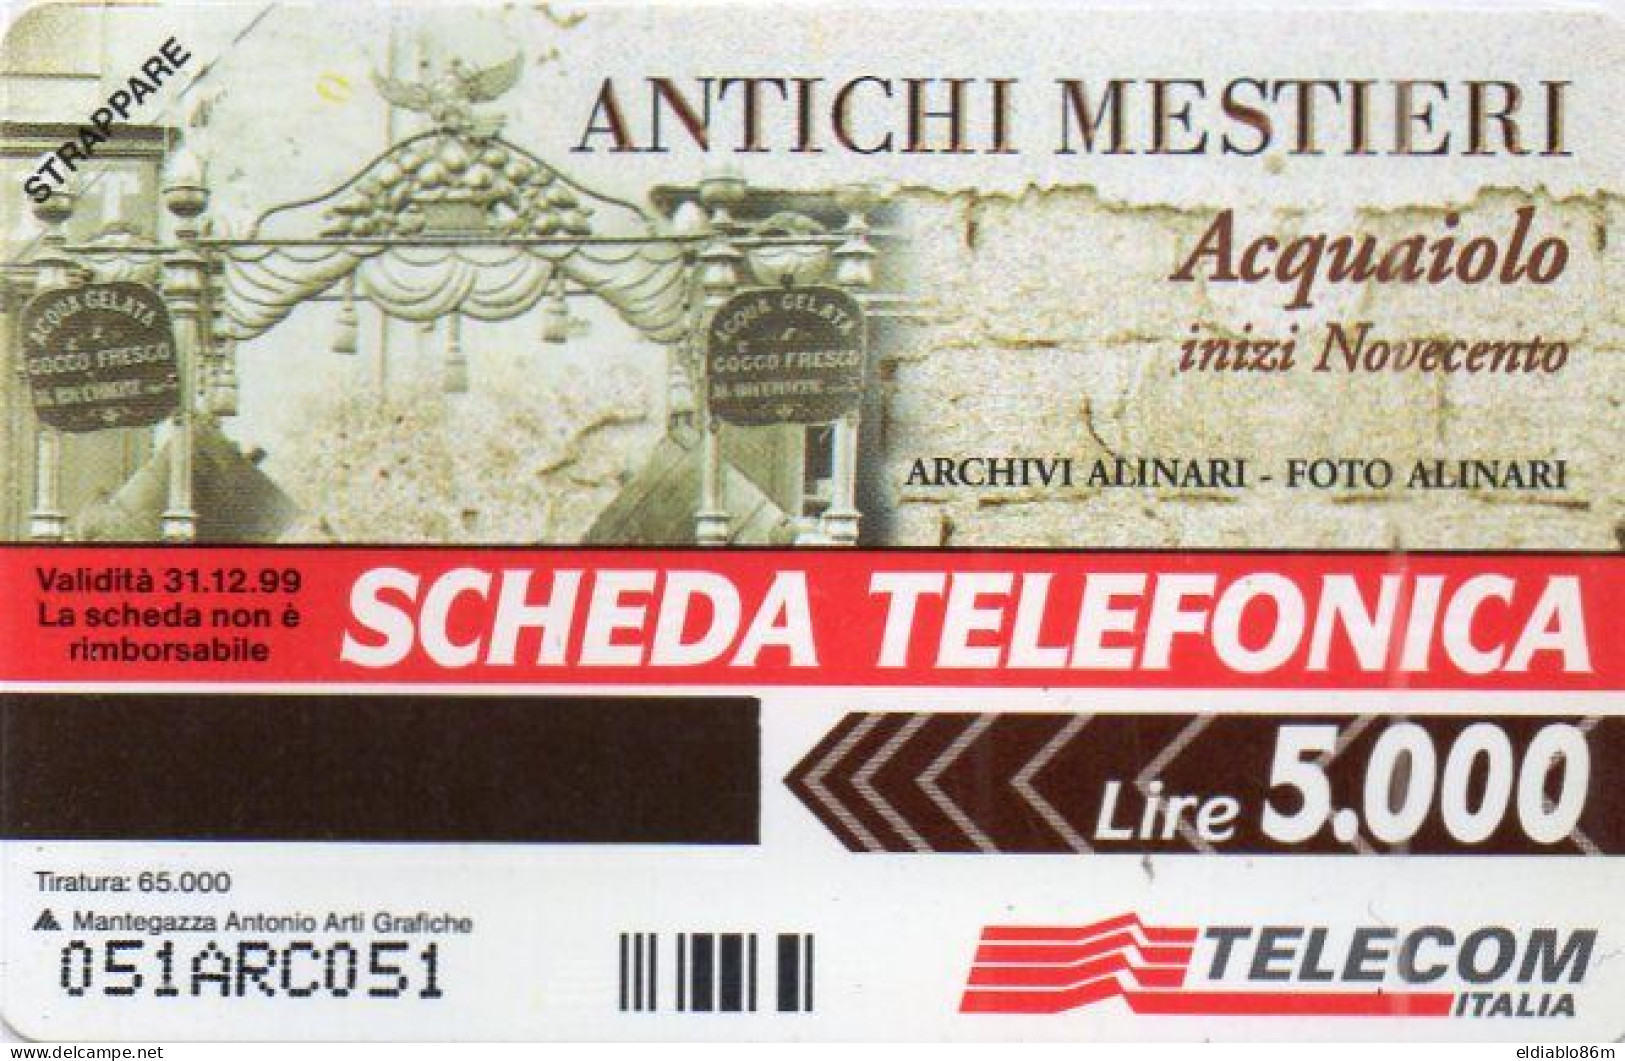 ITALY - URMET - ARC CARD (FOR INTERNAL TELECOM ARCHIVES) - SEE BATCH NUMBER - 200ex - MINT - Tests & Servicios